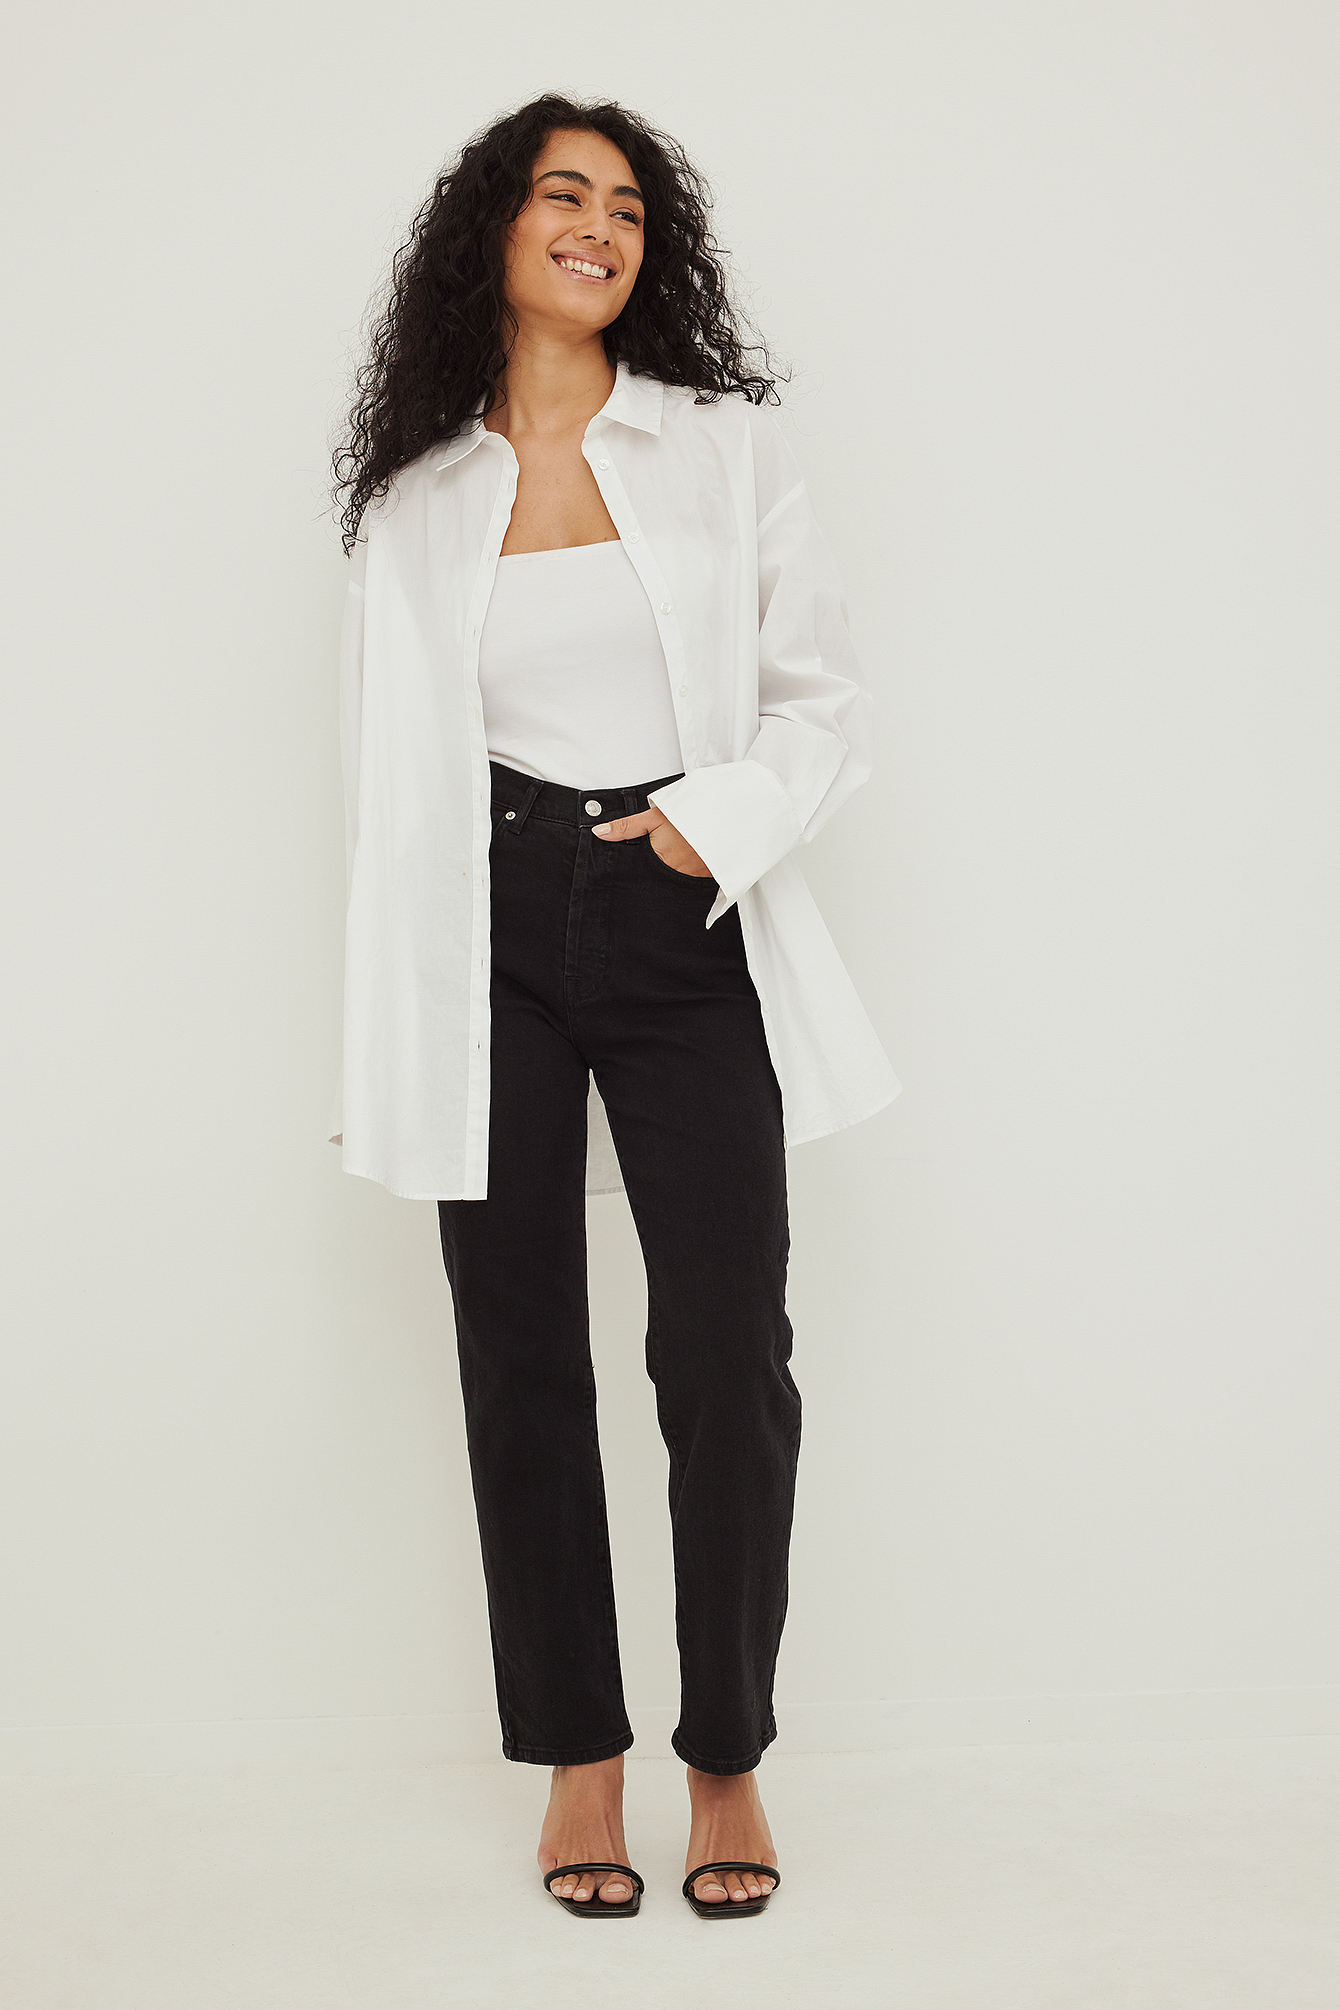 Boohoo Petite Ruched Cuff Detail Pants Suit in White Womens Clothing Suits 